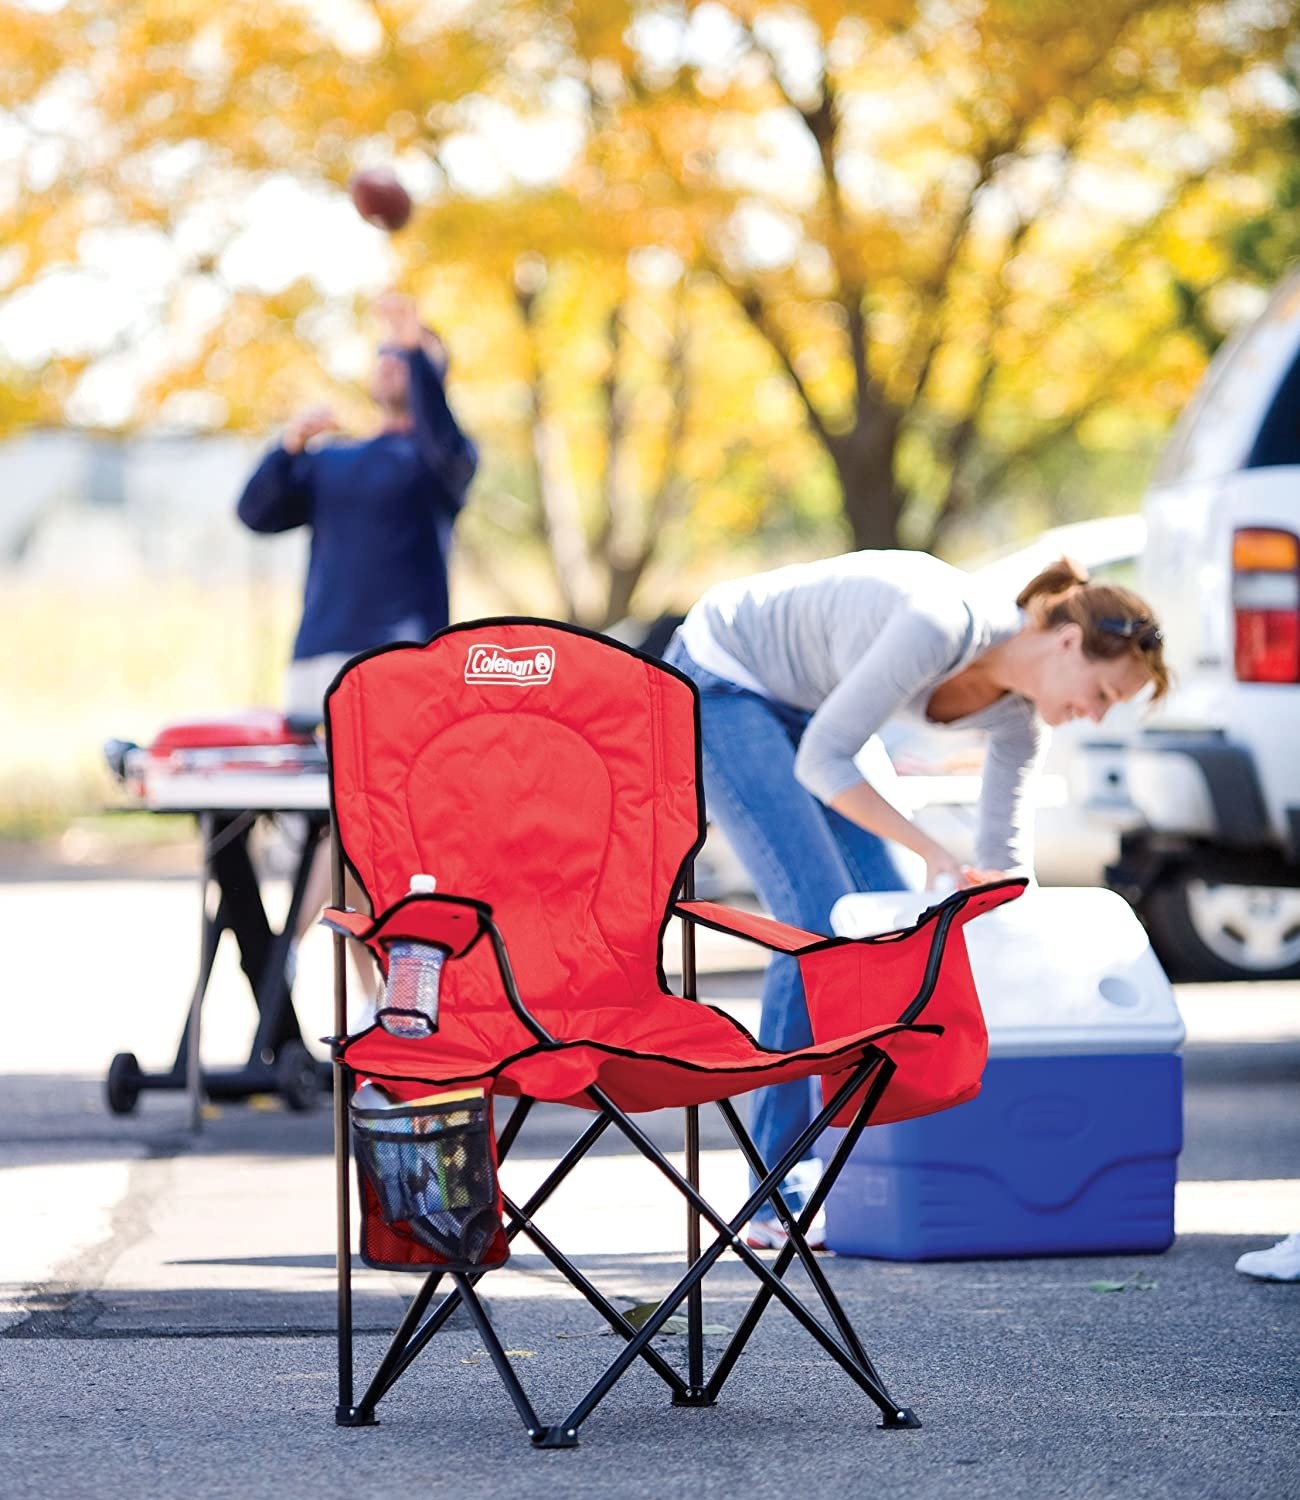 An open red Coleman chair with beverage holder, coolers, and side pouch in full use